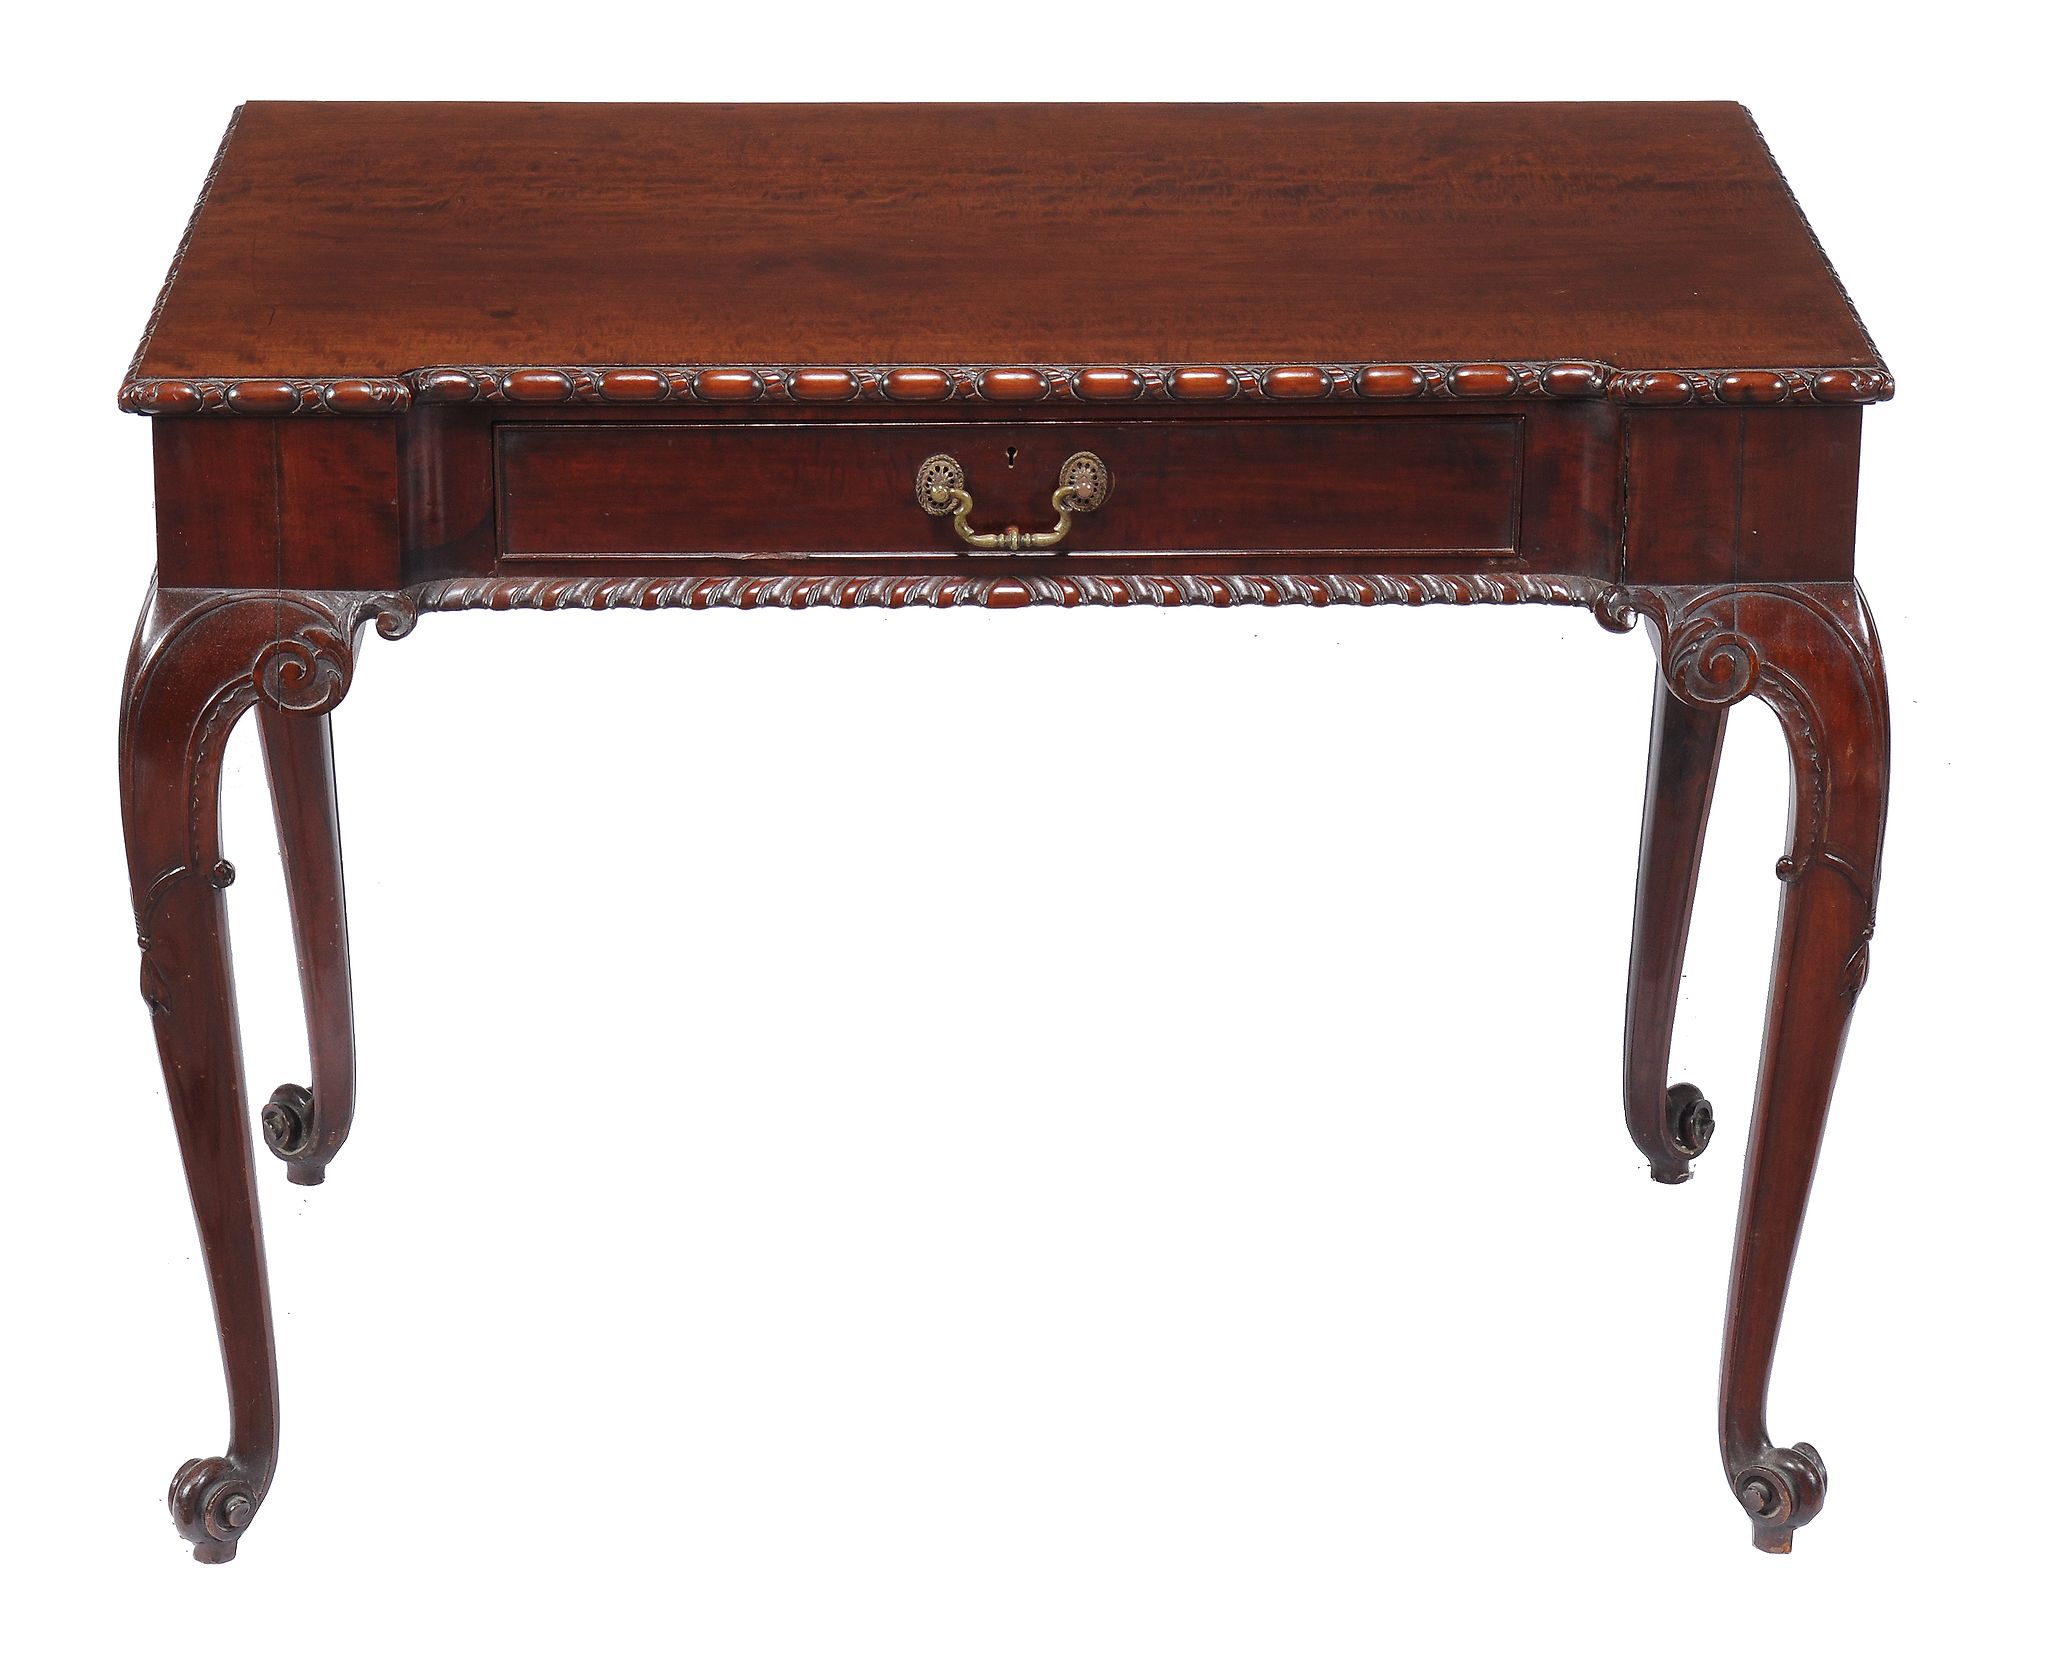 A Victorian mahogany side table in George III style, second half 19th century, after the manner of